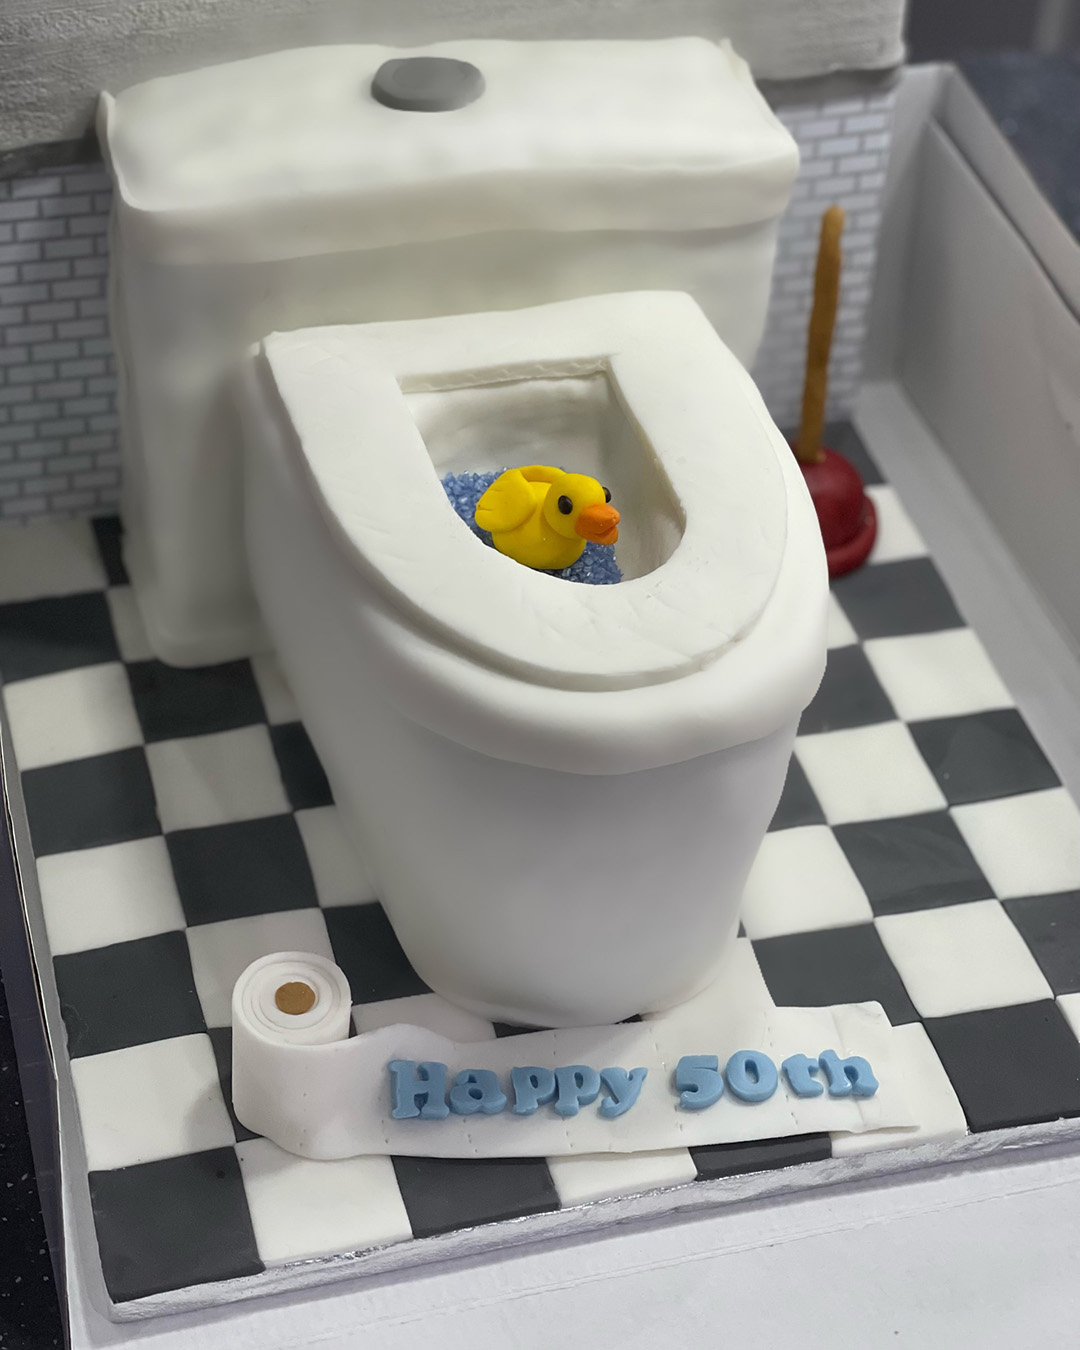 Delicious Toilet Cake for a Memorable 17th Birthday